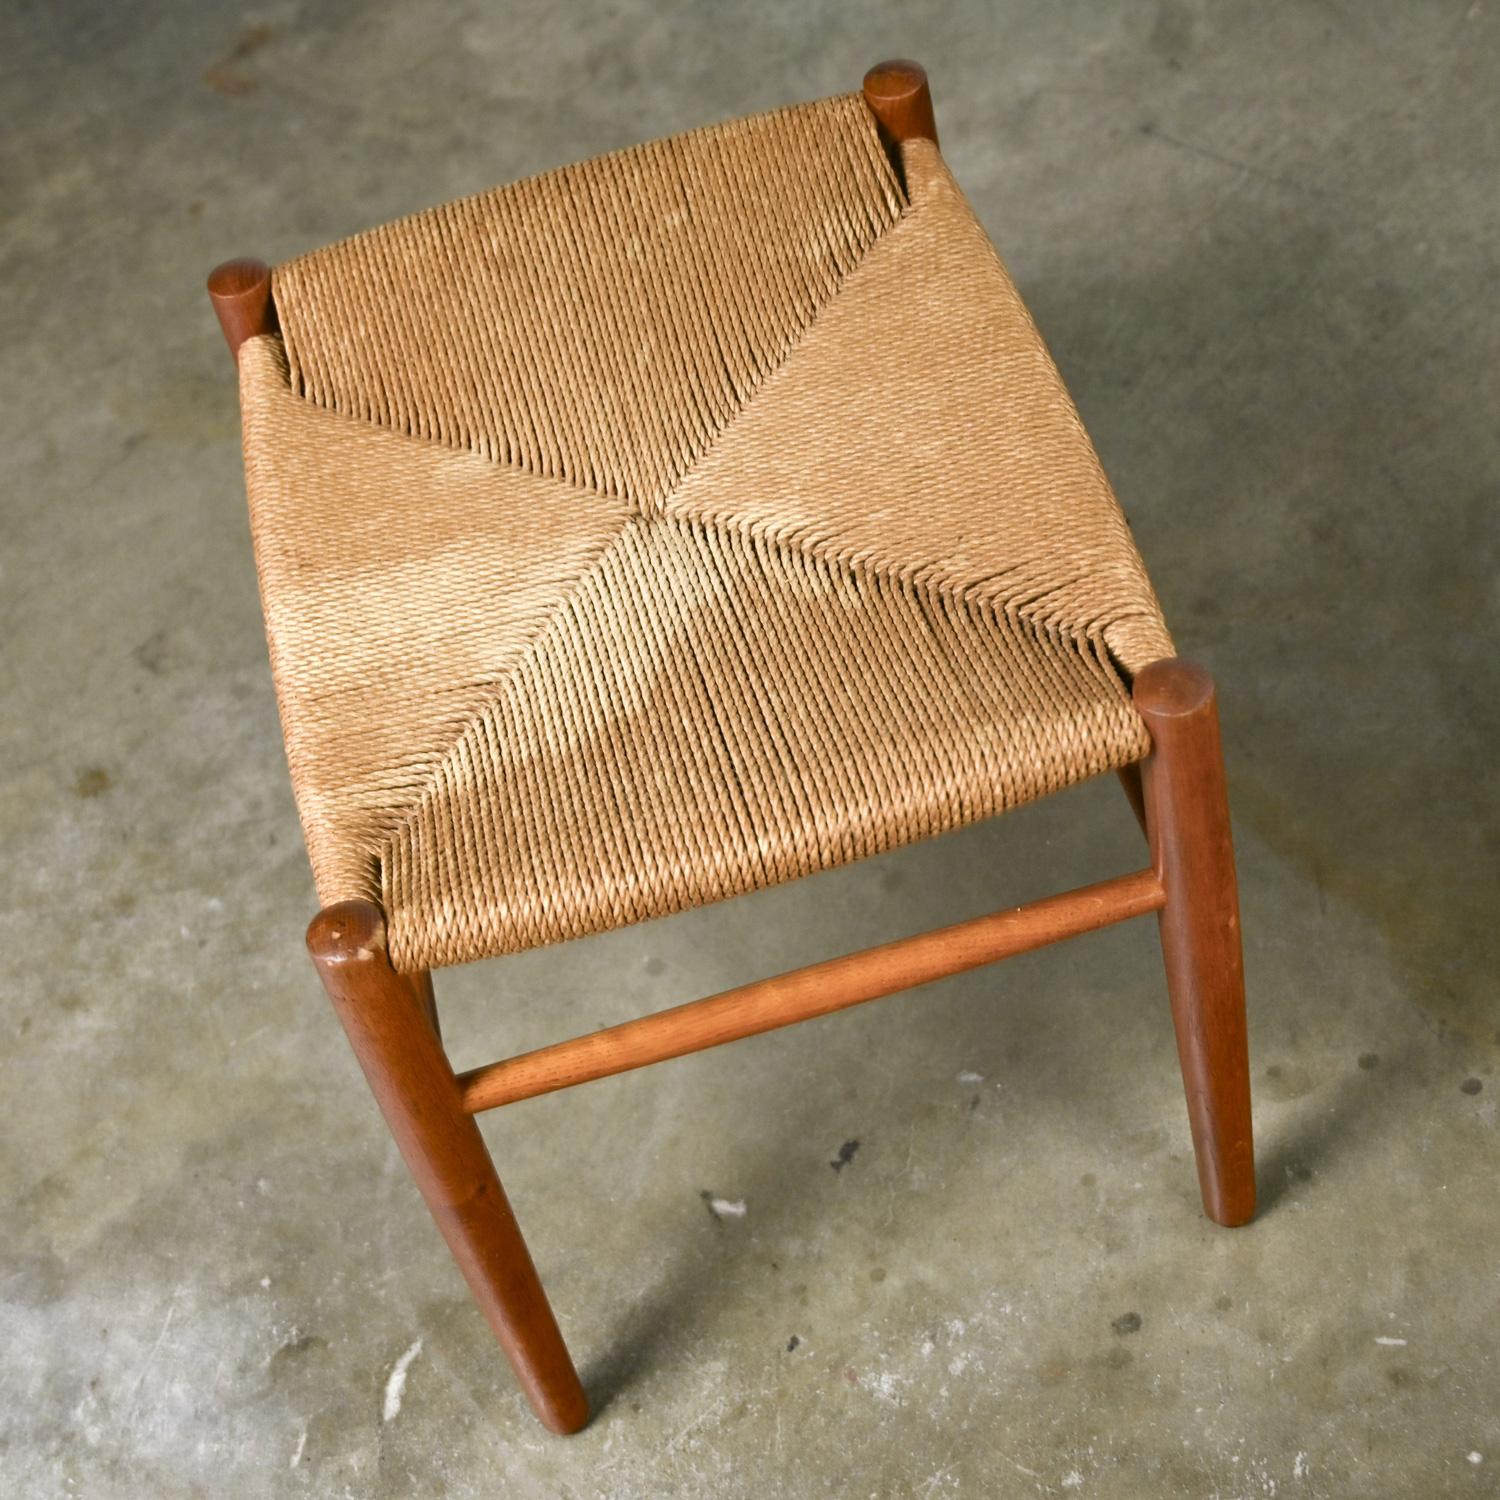 Papercord Mid-20th Century Scandinavian Modern Low Stool Teak with Natural Paper Cord Seat